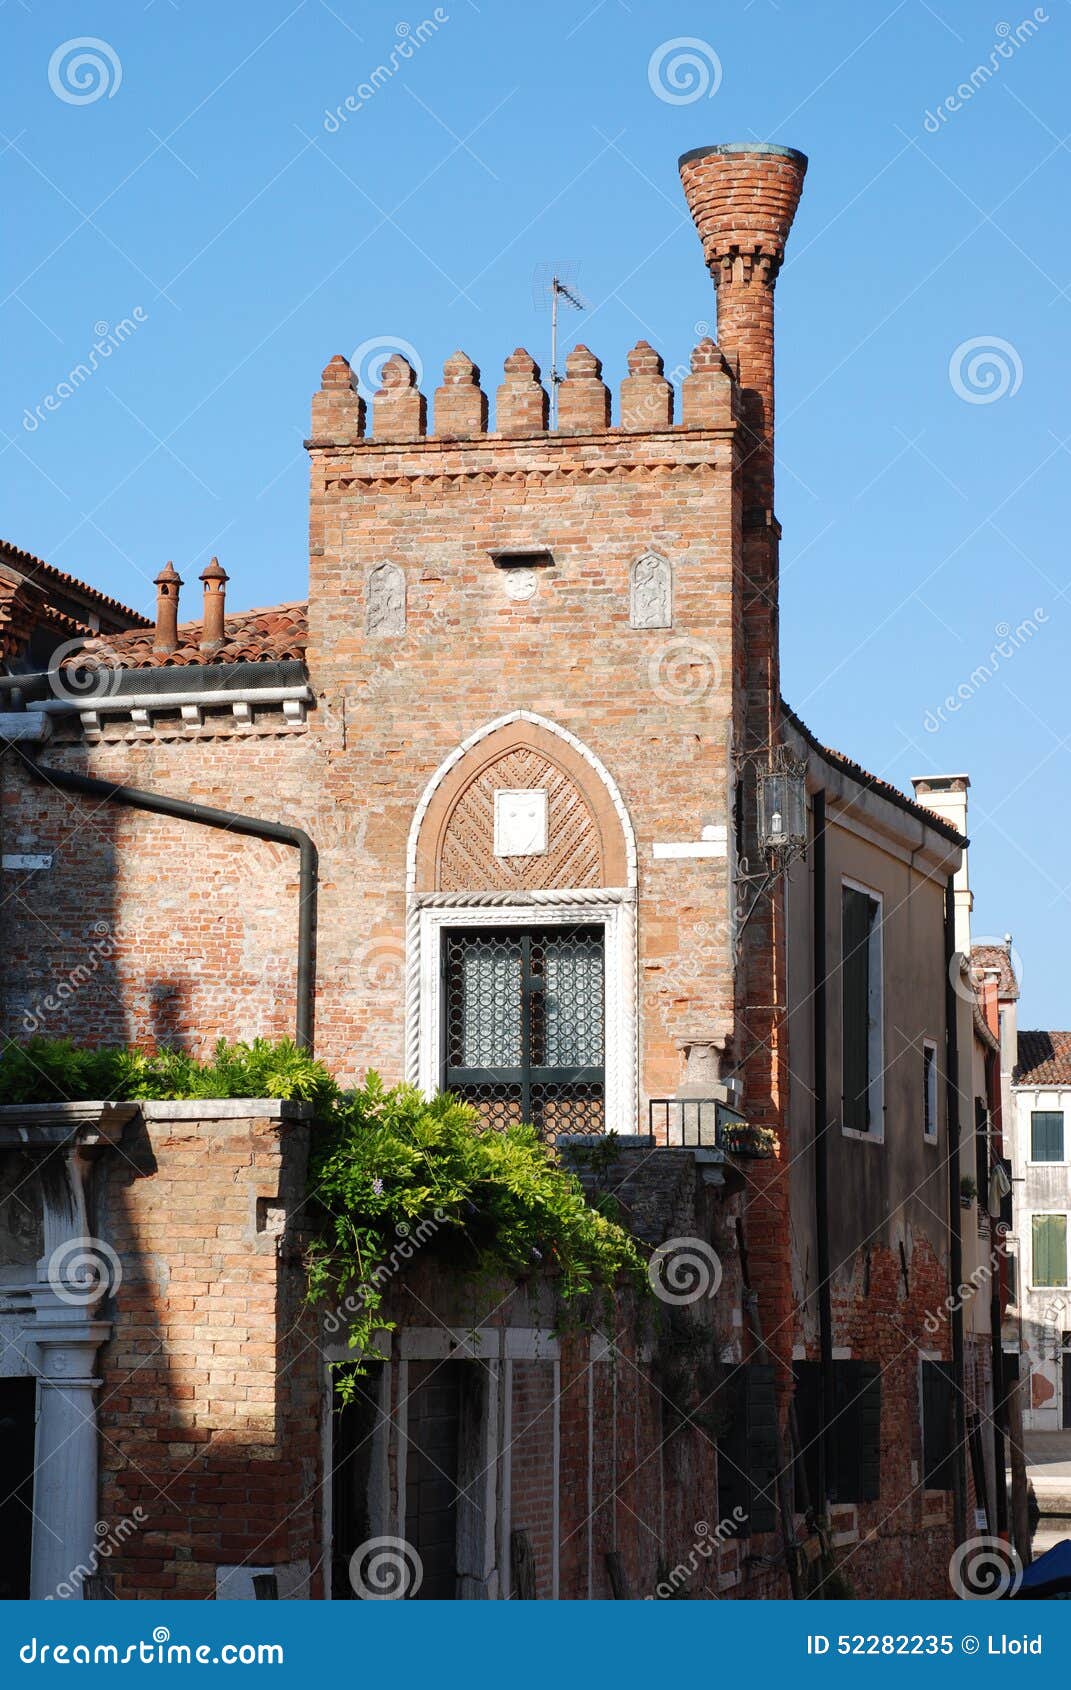 The brick house with a flue on the street of Venice. Italy.